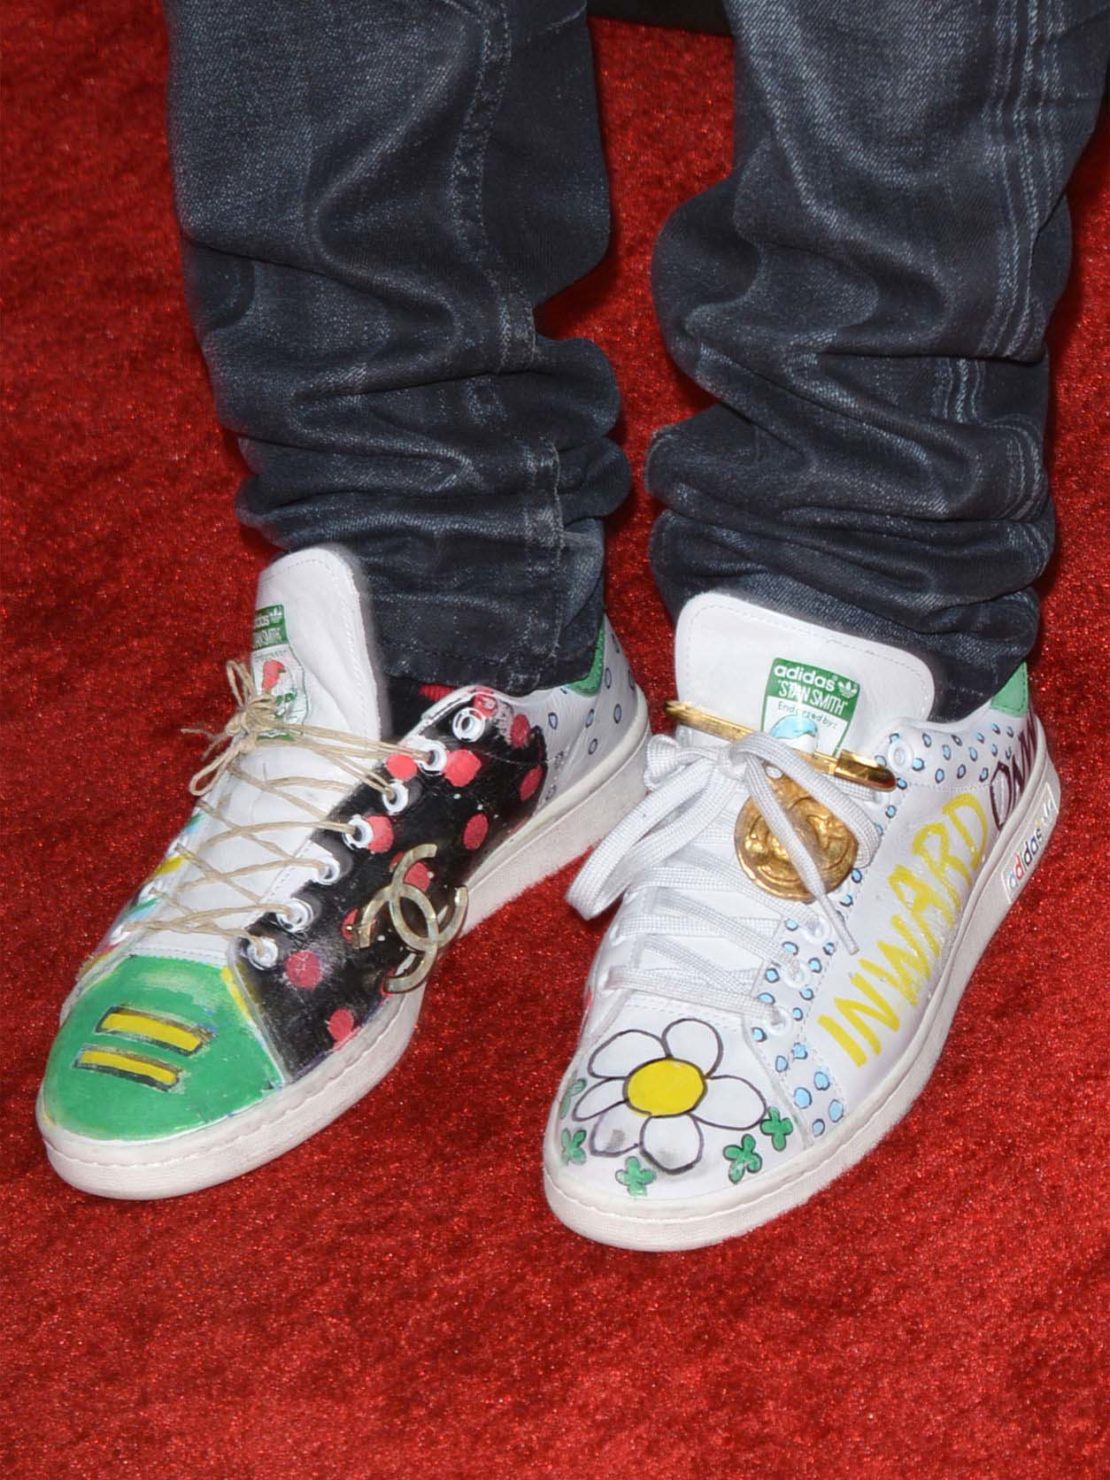 Limited edition Stan Smith shoes customised by Pharrell Williams